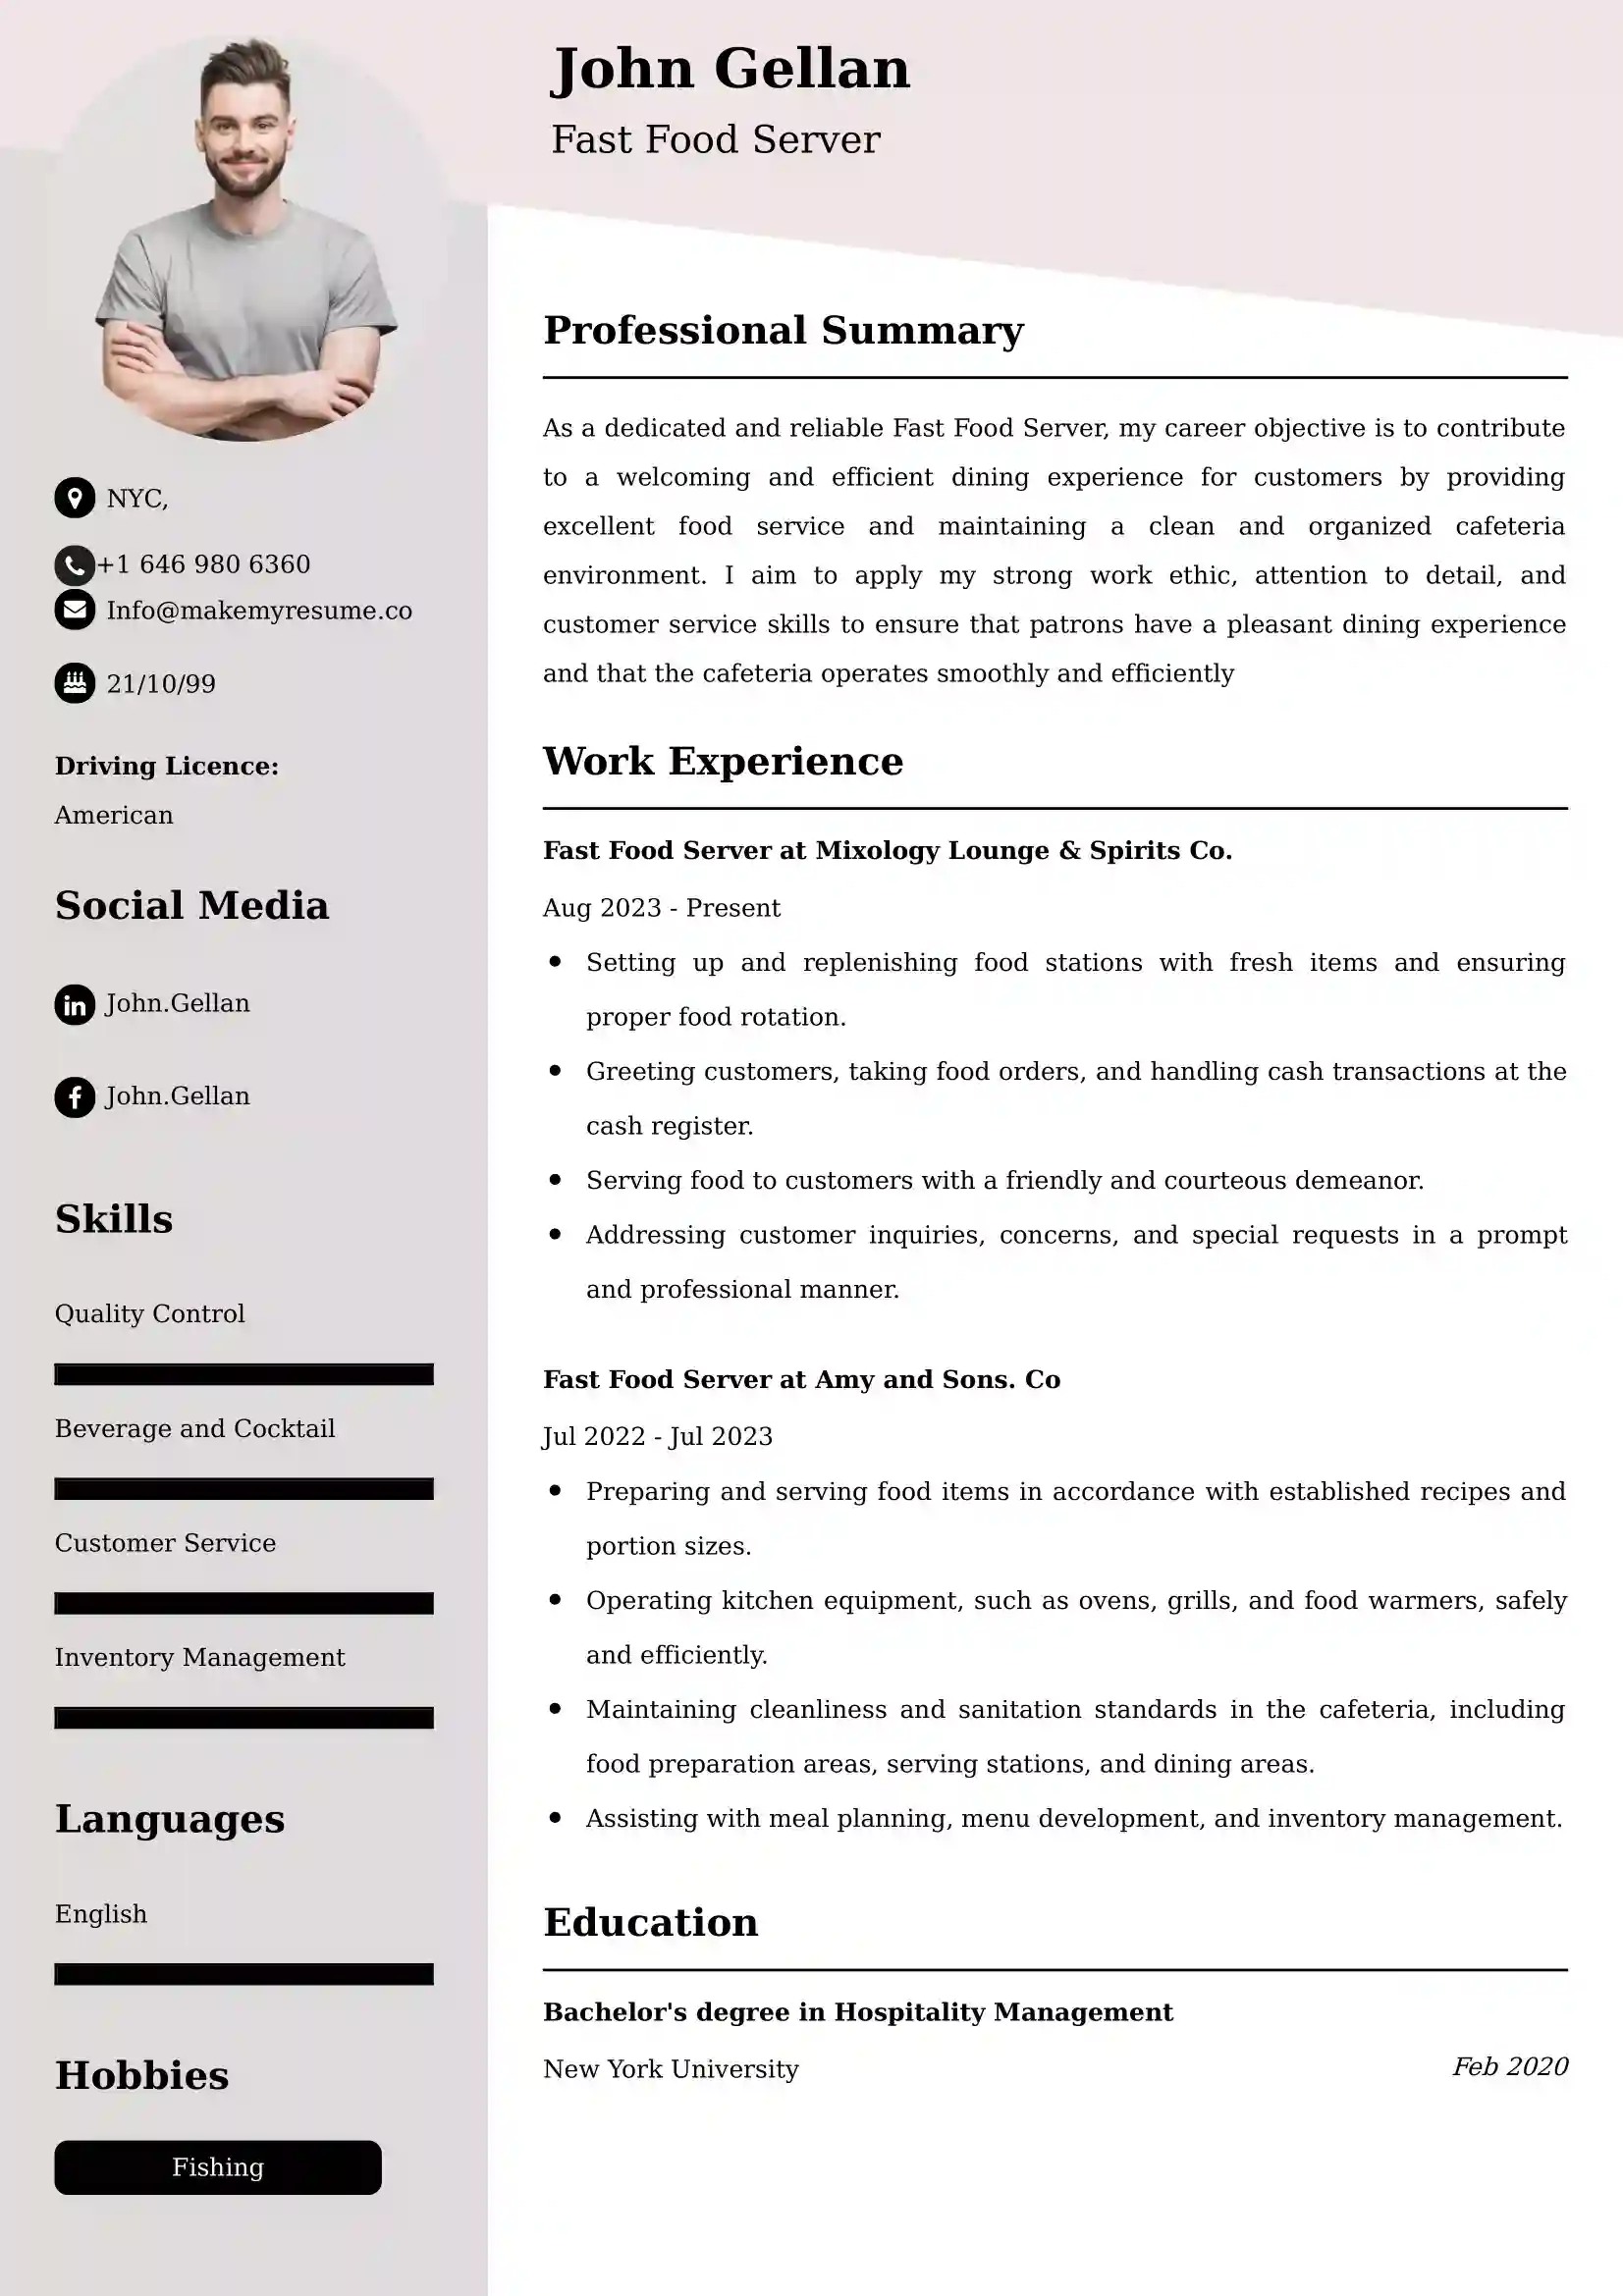 Fast Food Server Resume Examples - Brazilian Format, Latest Template